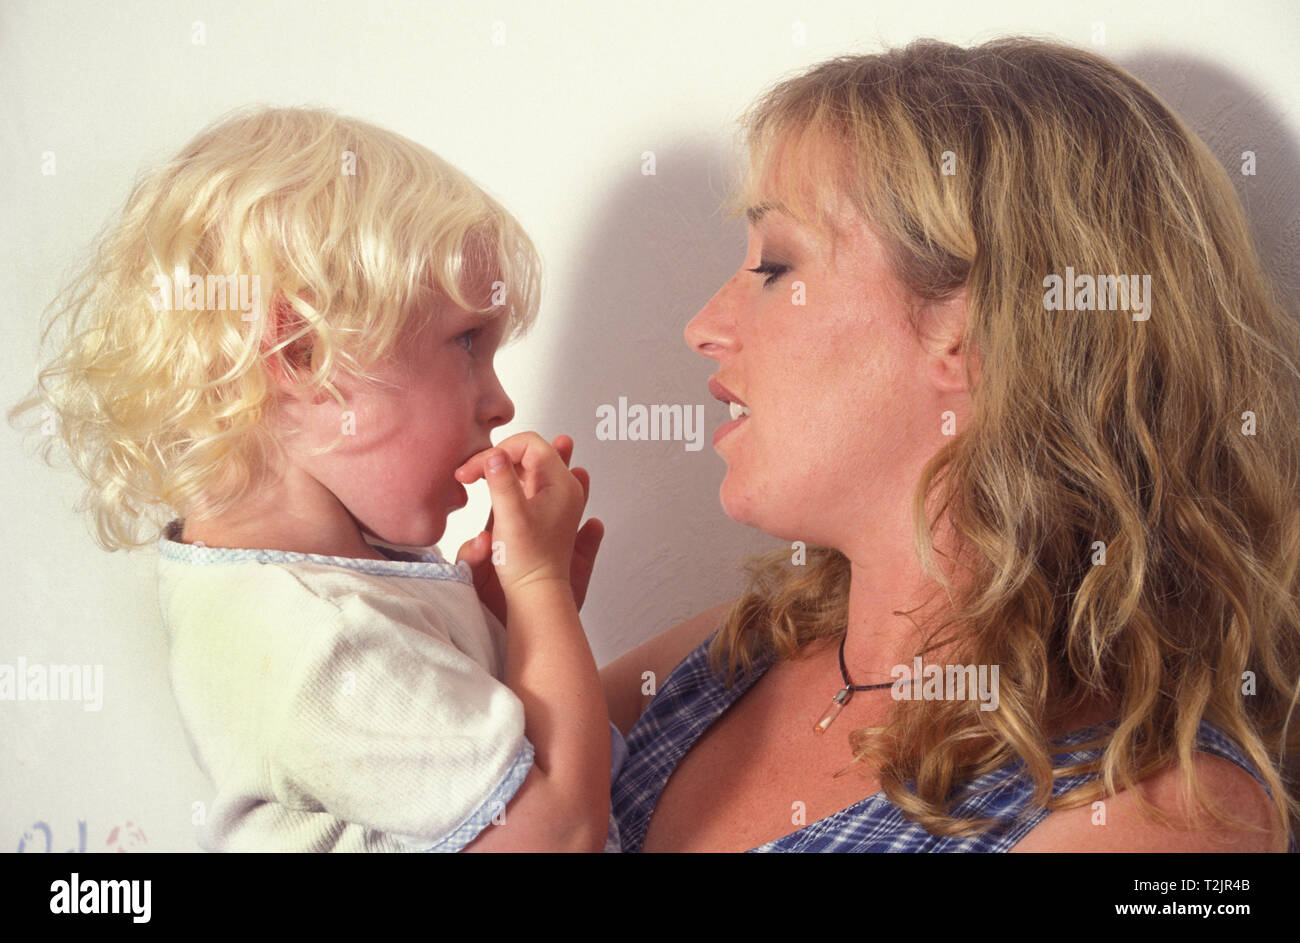 mother consoling unhappy little girl Stock Photo